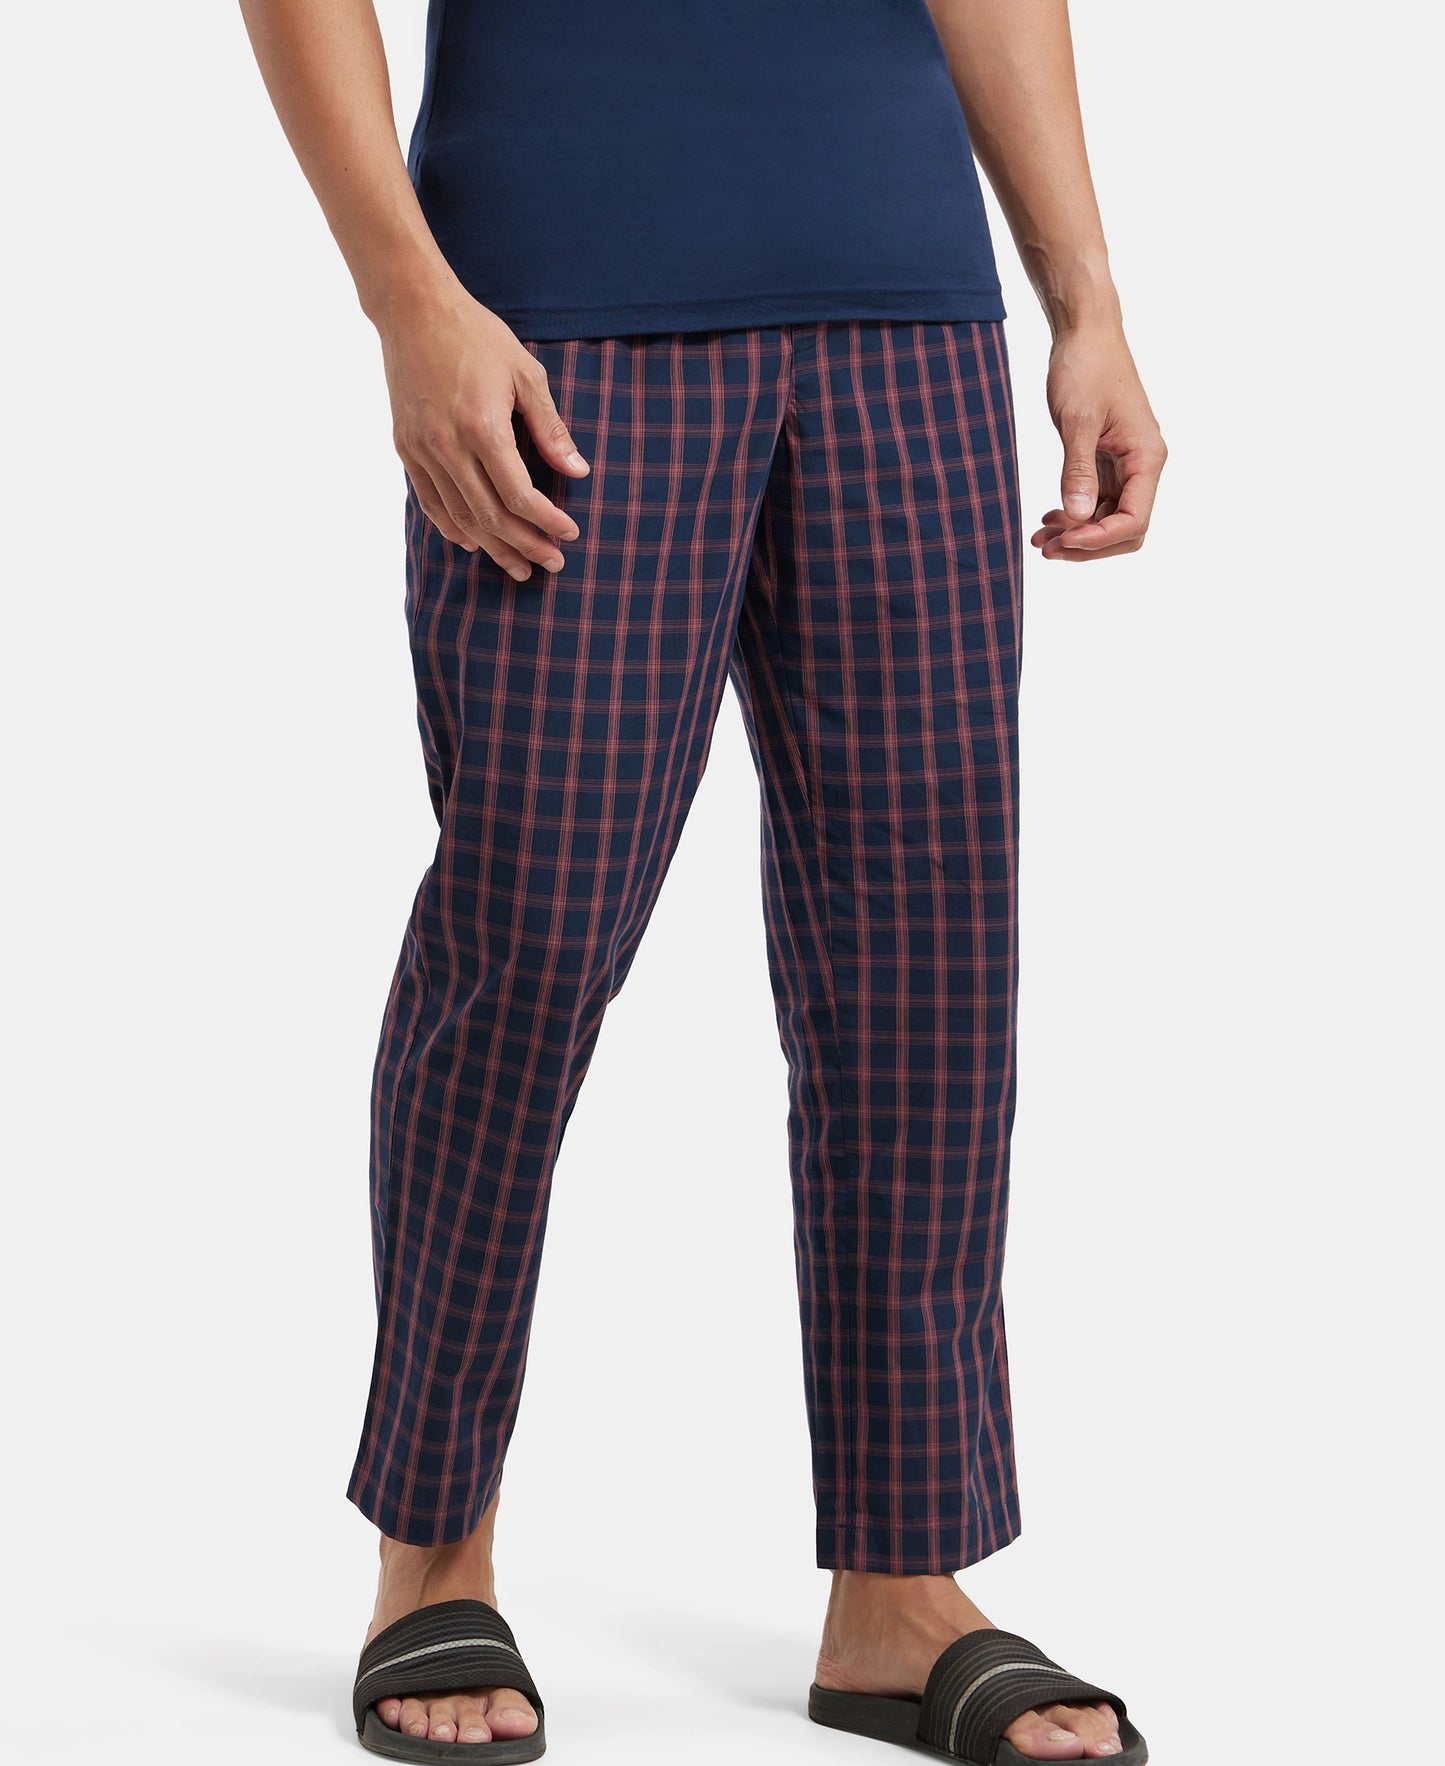 Super Combed Cotton Woven Fabric Regular Fit Checkered Pyjama with Side Pockets - Navy